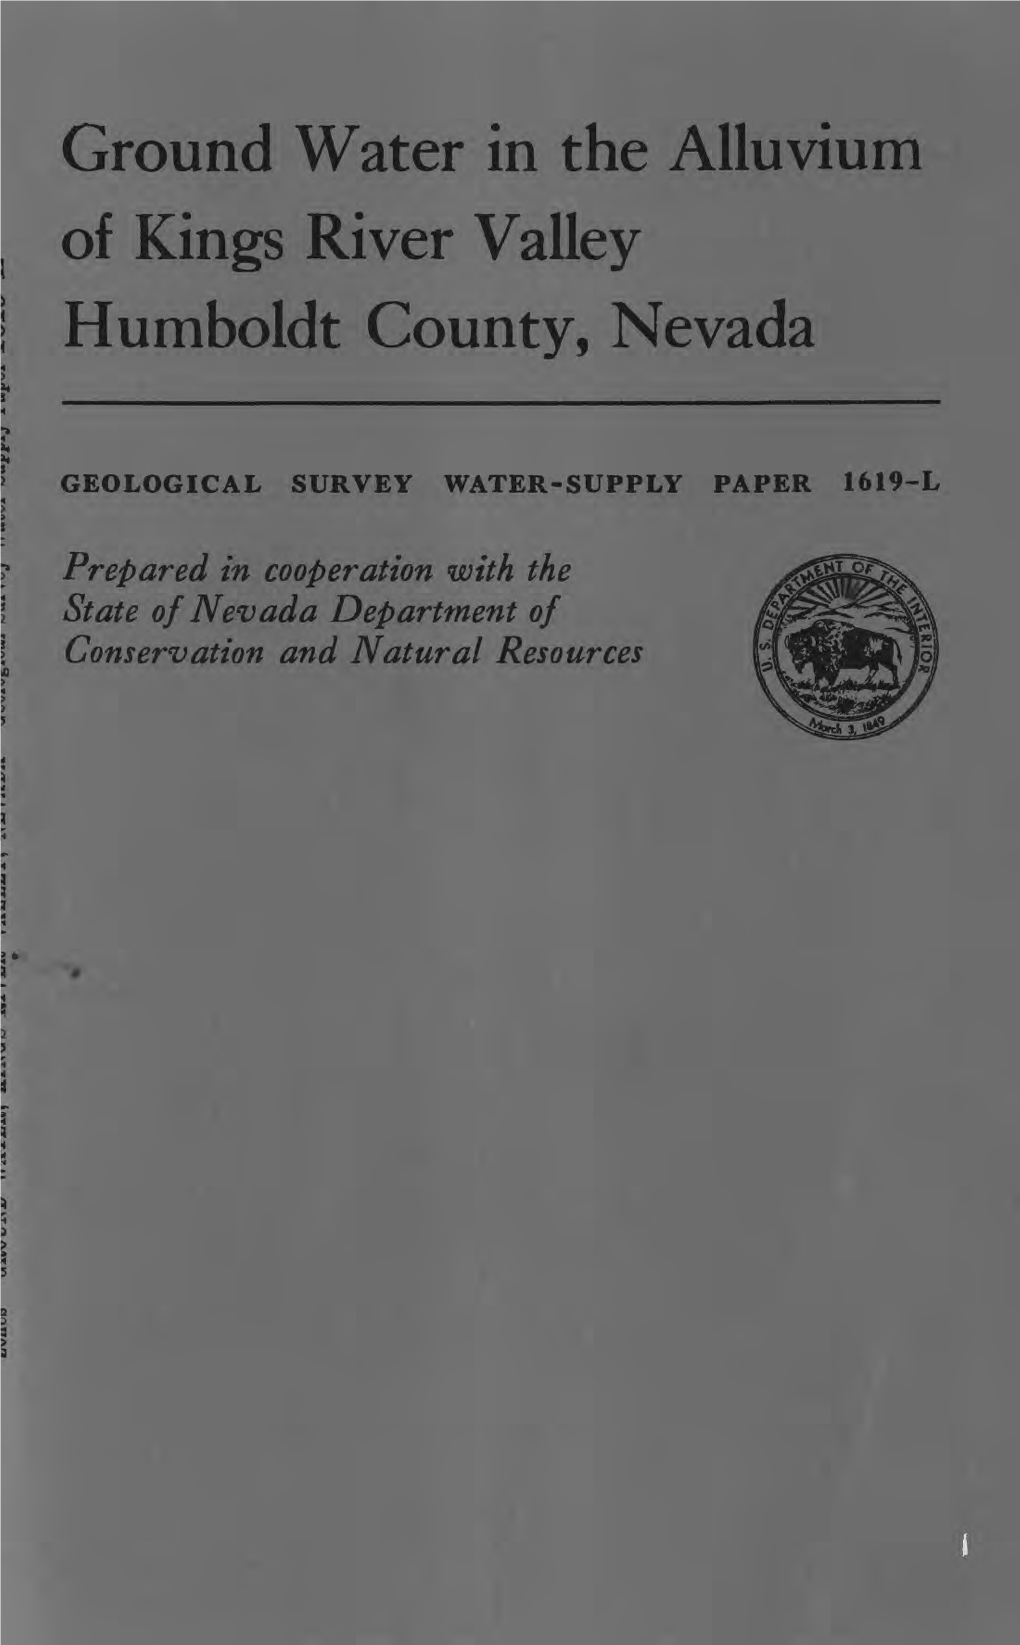 Ground Water in the Alluvium of Kings River Valley Humboldt County, Nevada